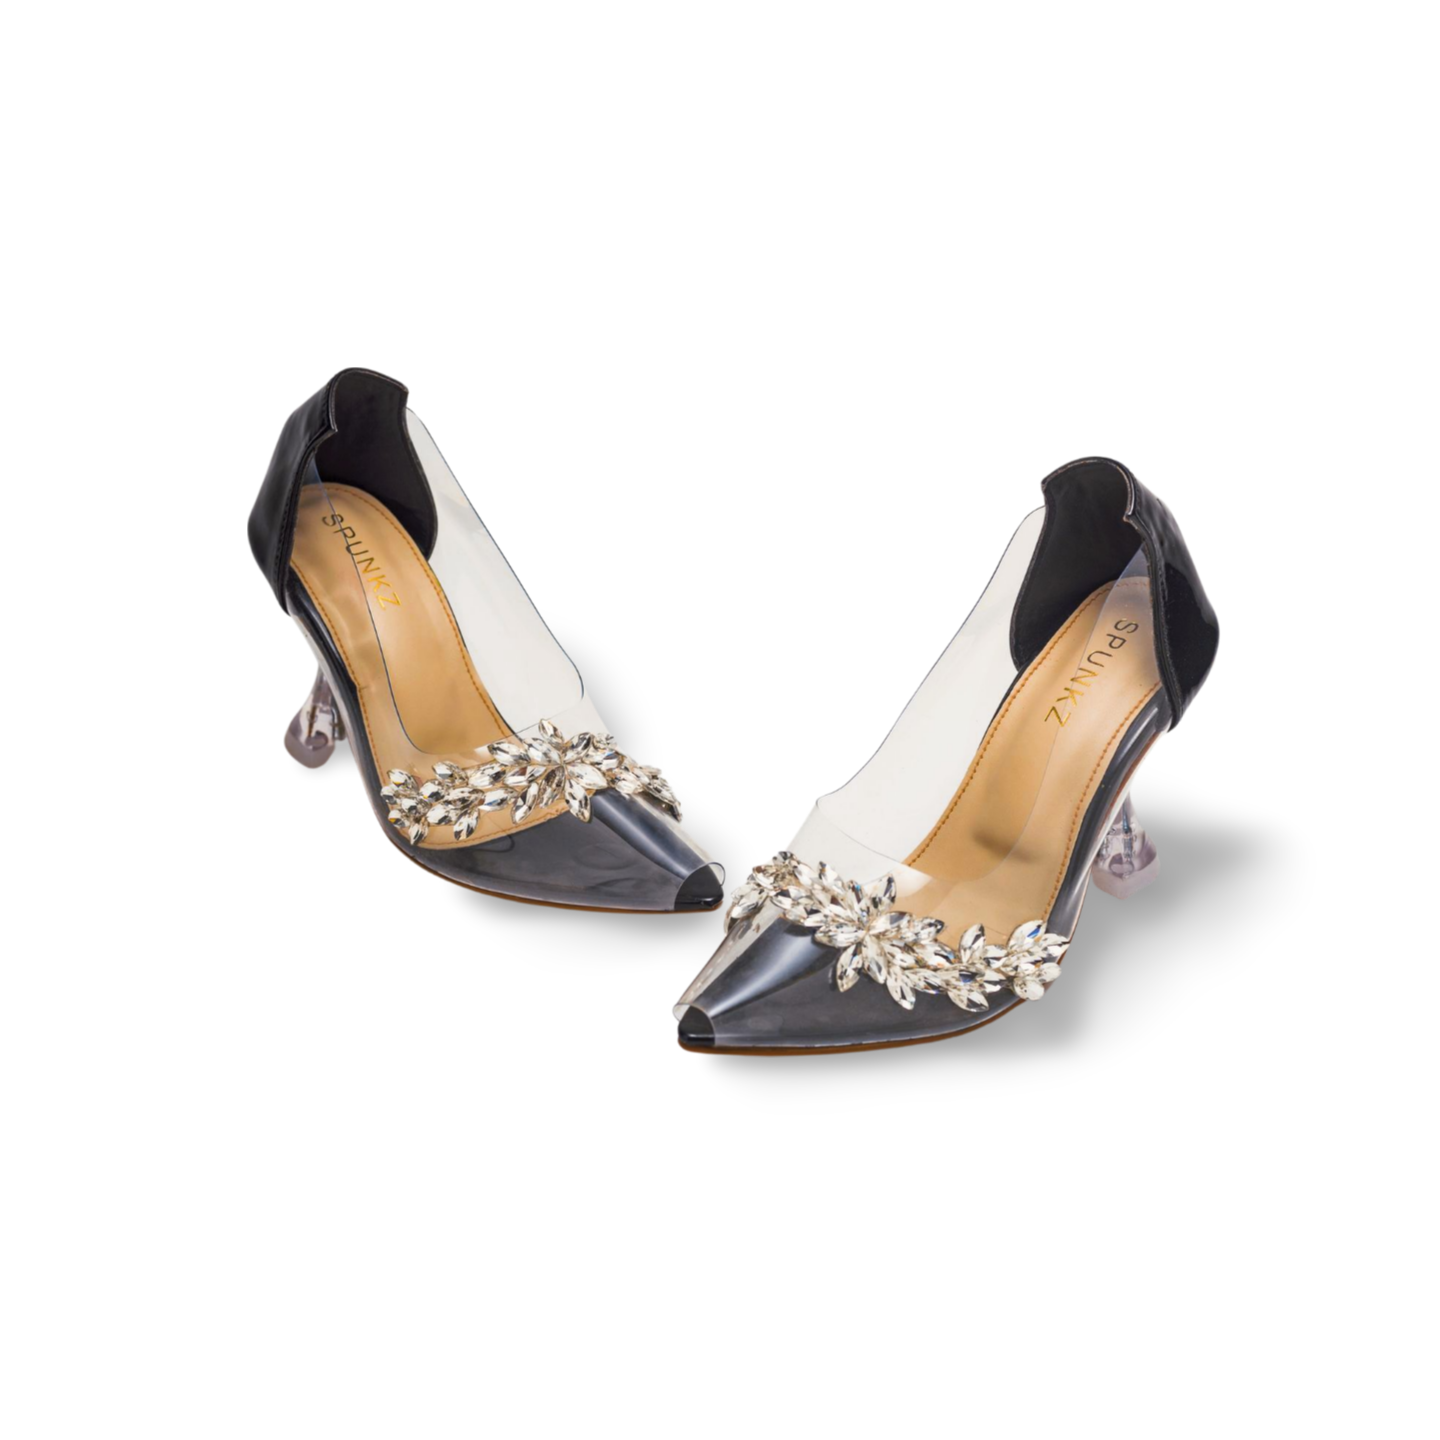 Cinderella Glass Pointed High Heels Women Shoes in Pakistan